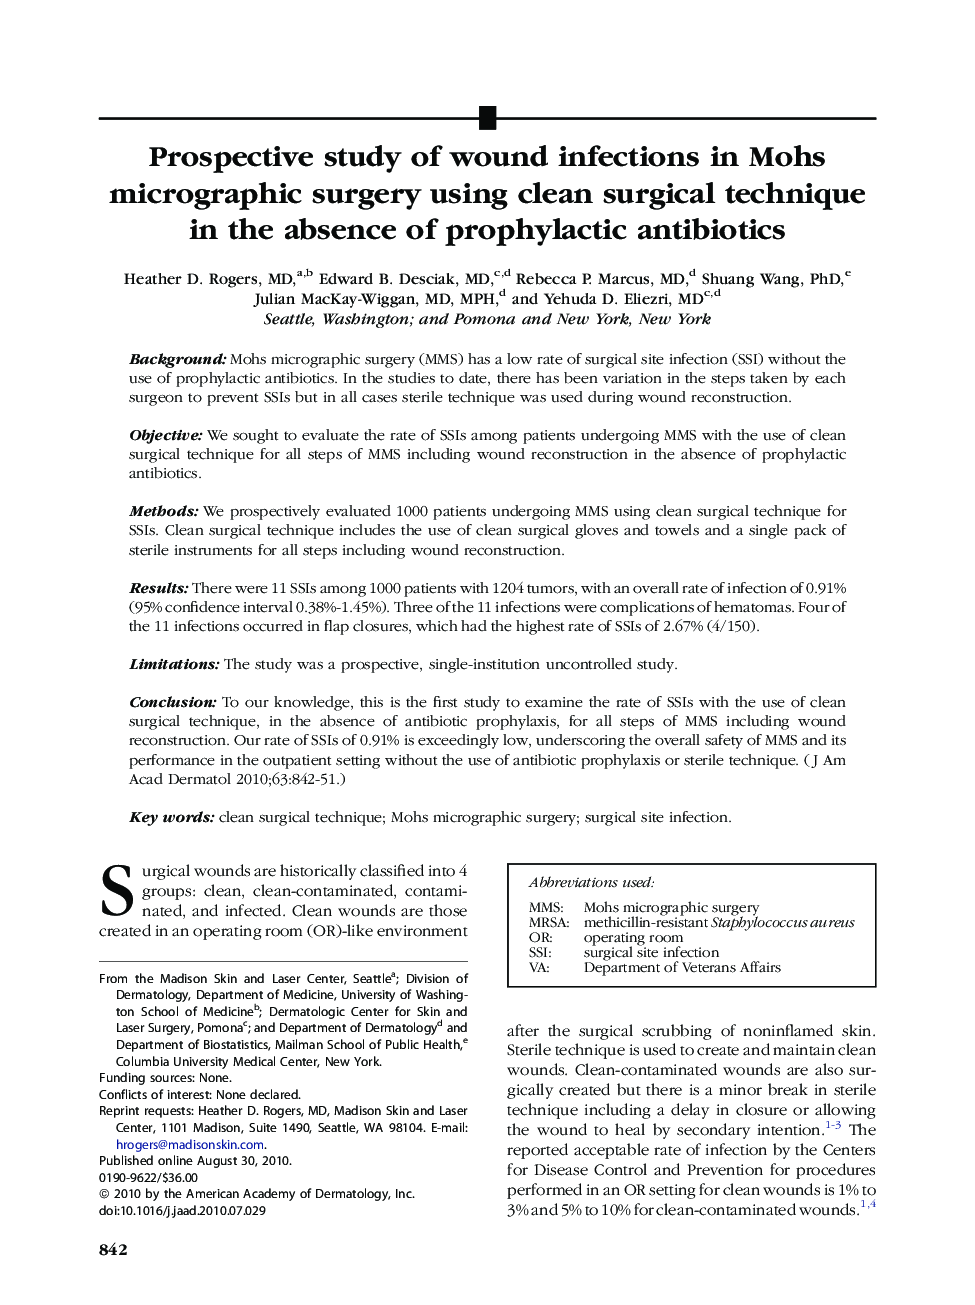 Prospective study of wound infections in Mohs micrographic surgery using clean surgical technique in the absence of prophylactic antibiotics 